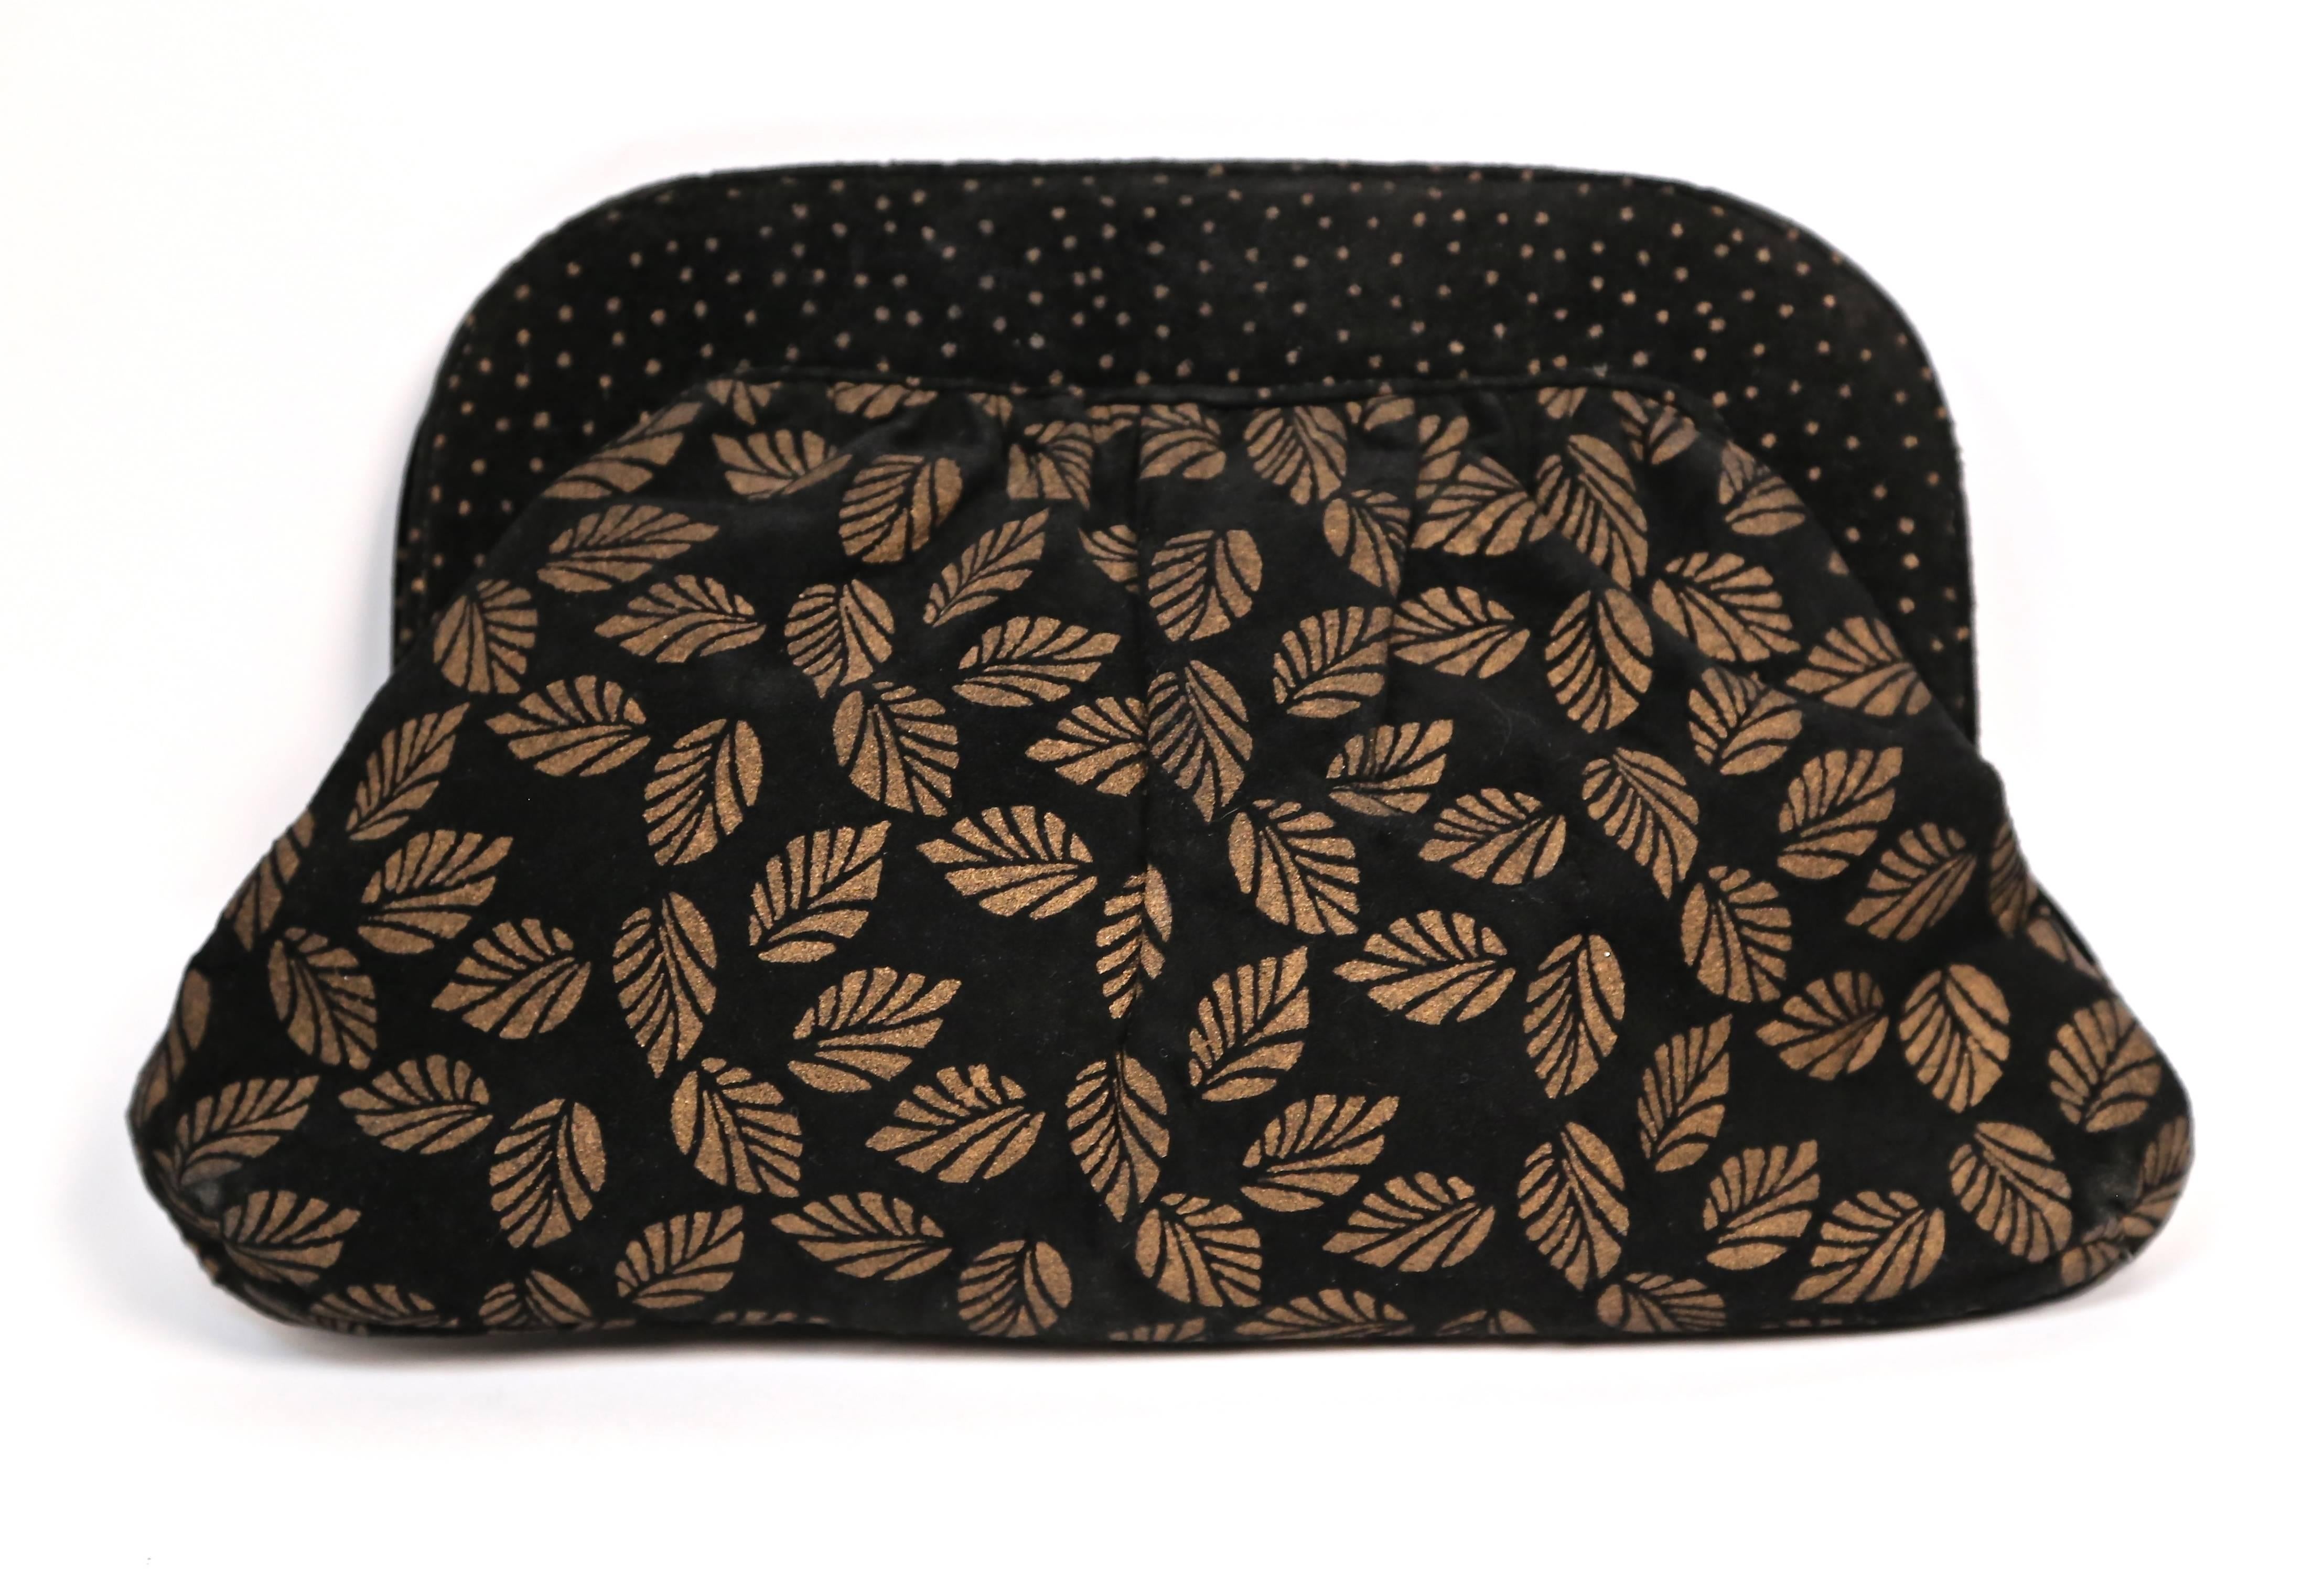 Black and gold suede convertible clutch from Halston dating to the 1970's. Measures approximately: 11